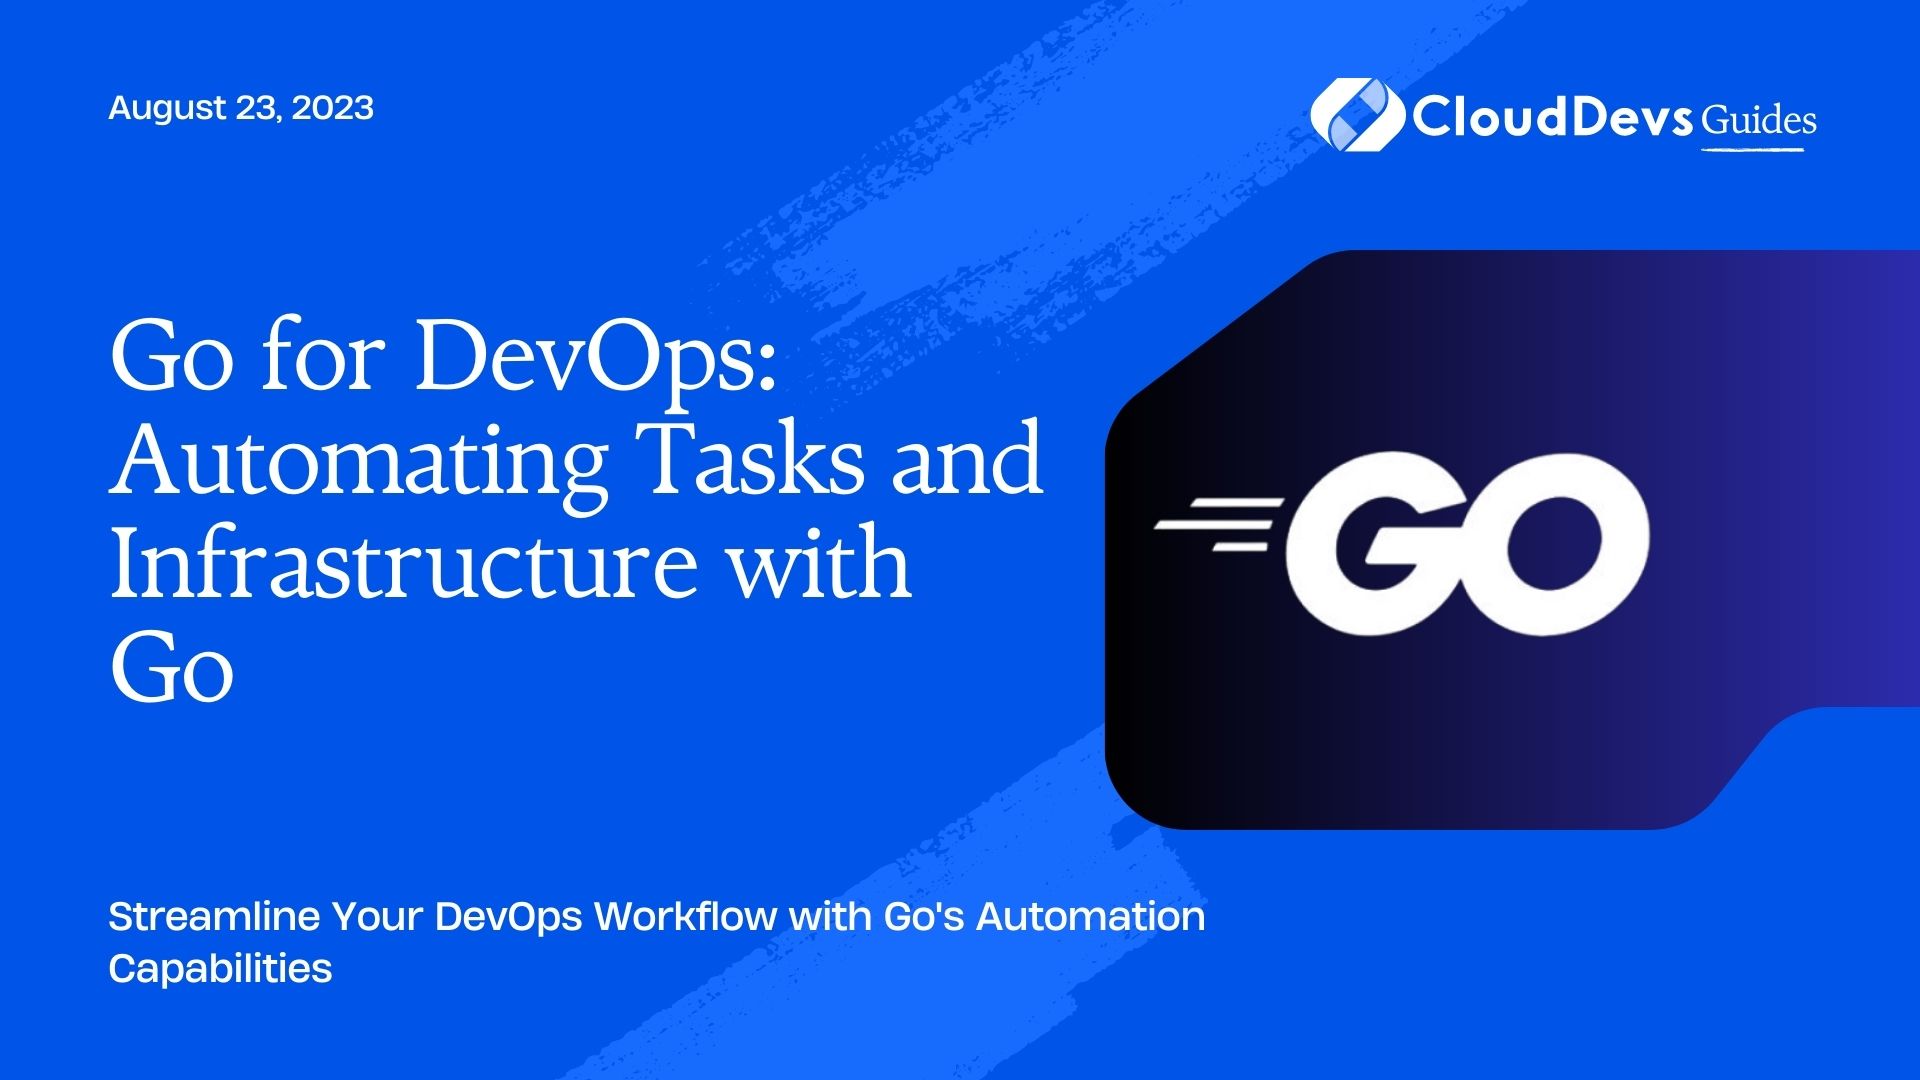 Go for DevOps: Automating Tasks and Infrastructure with Go